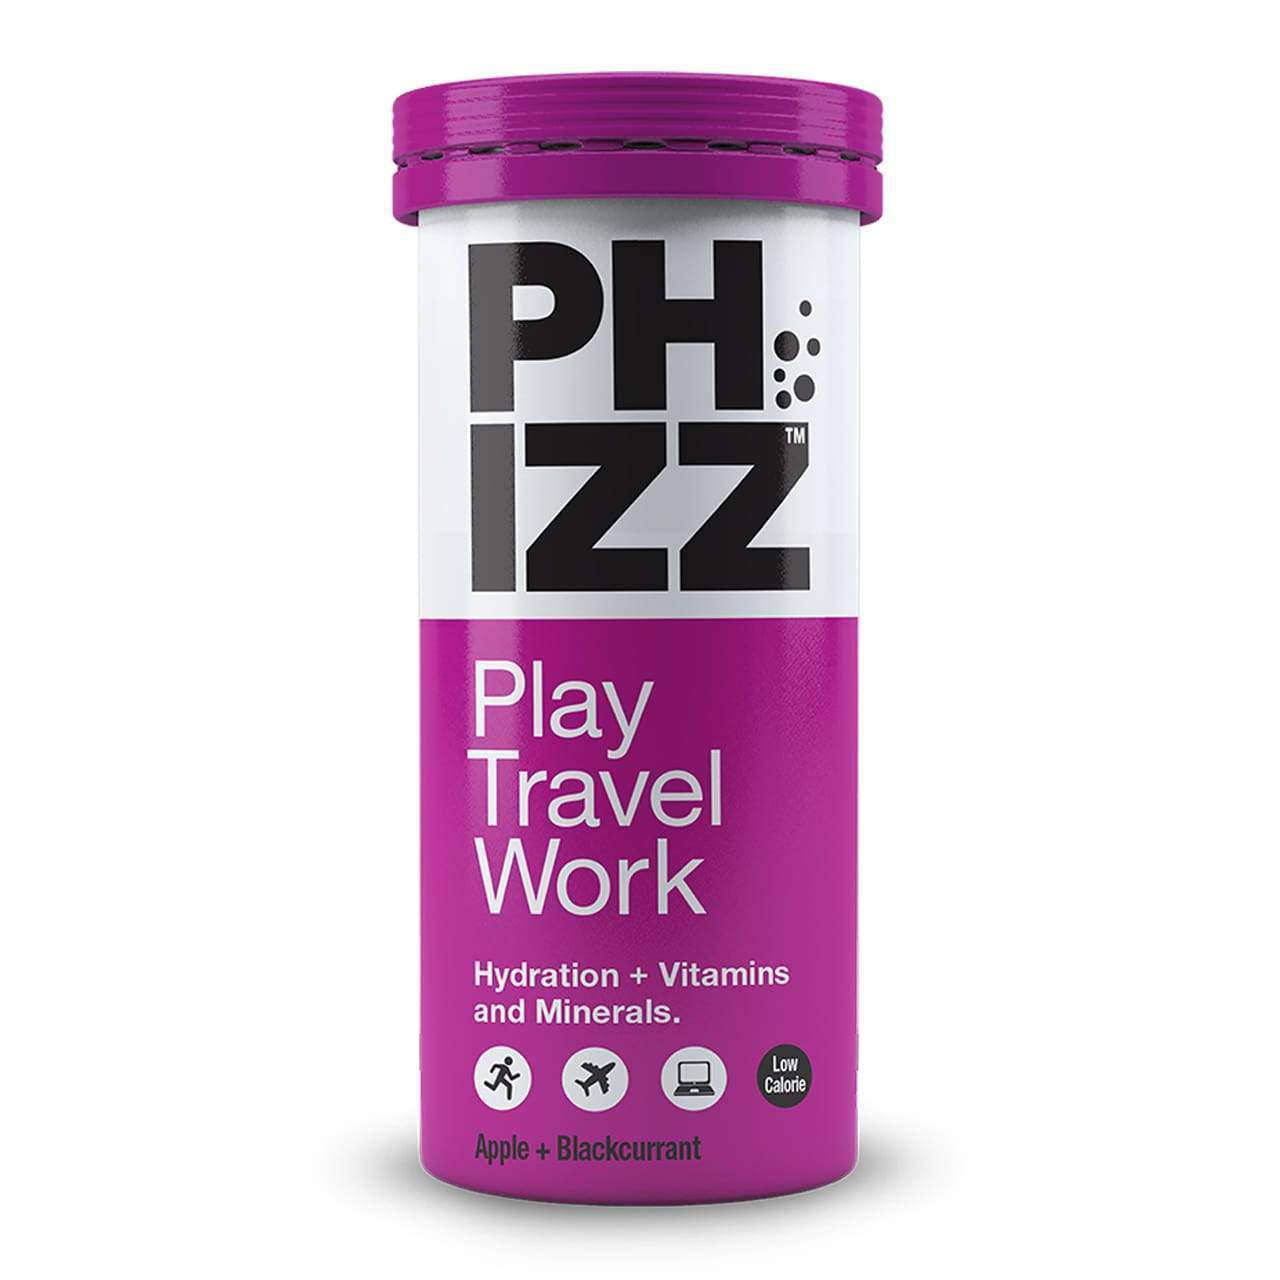 Phizz Apple & Blackcurrant Hydration Plus Vitamins and Minerals Tablet - 10ct